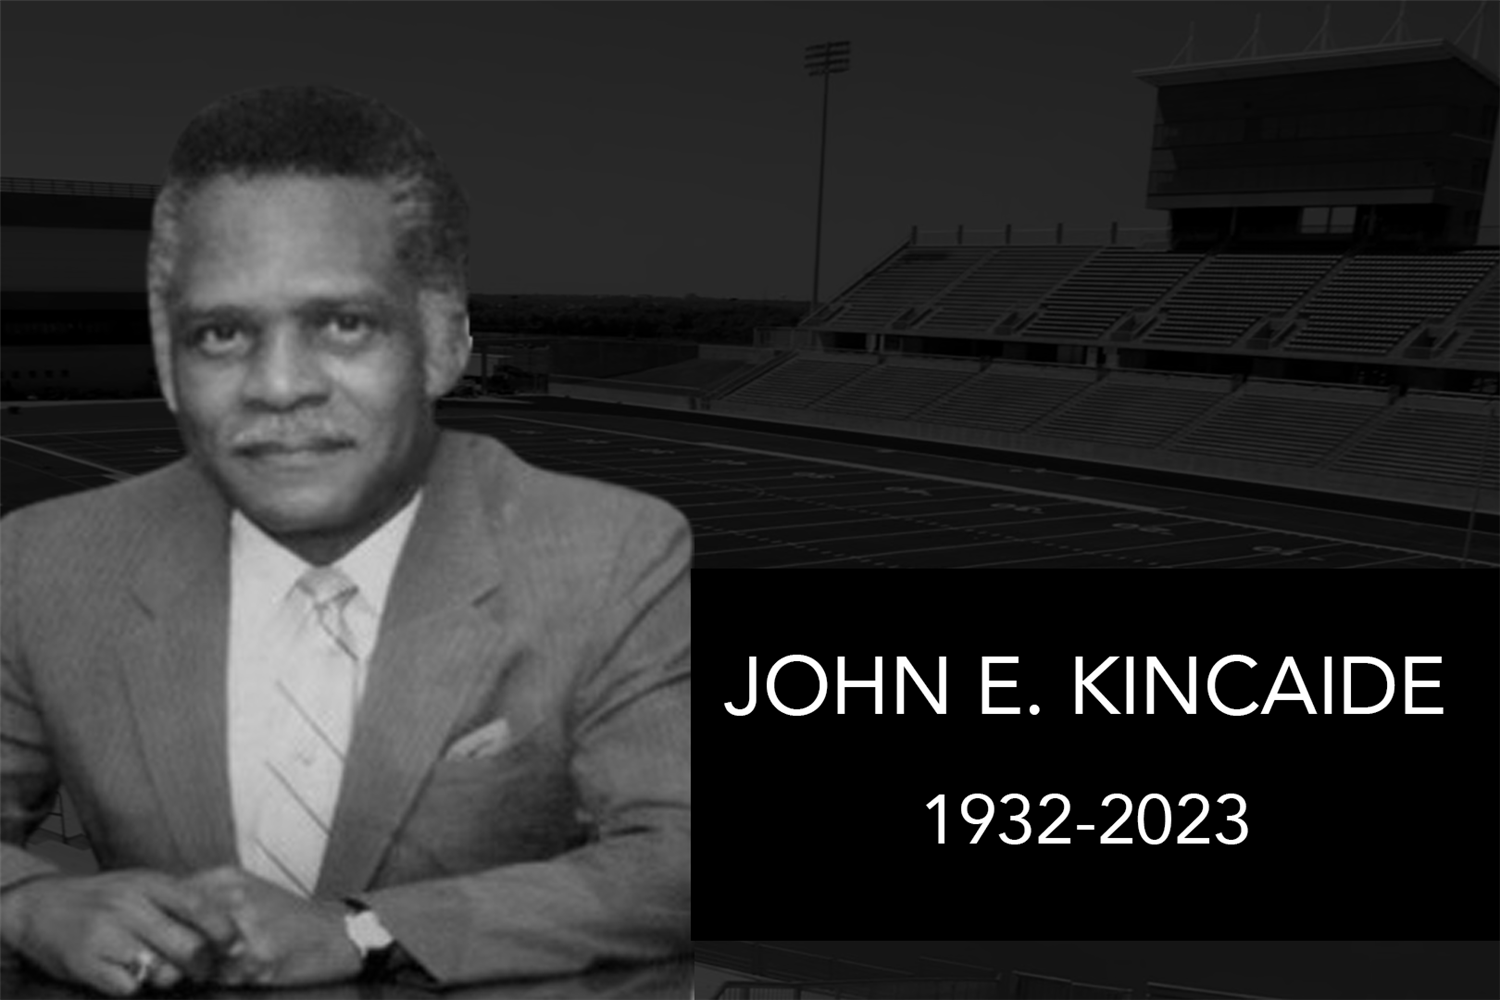  Dallas ISD Mourns Loss of First Black AD John Kincaide